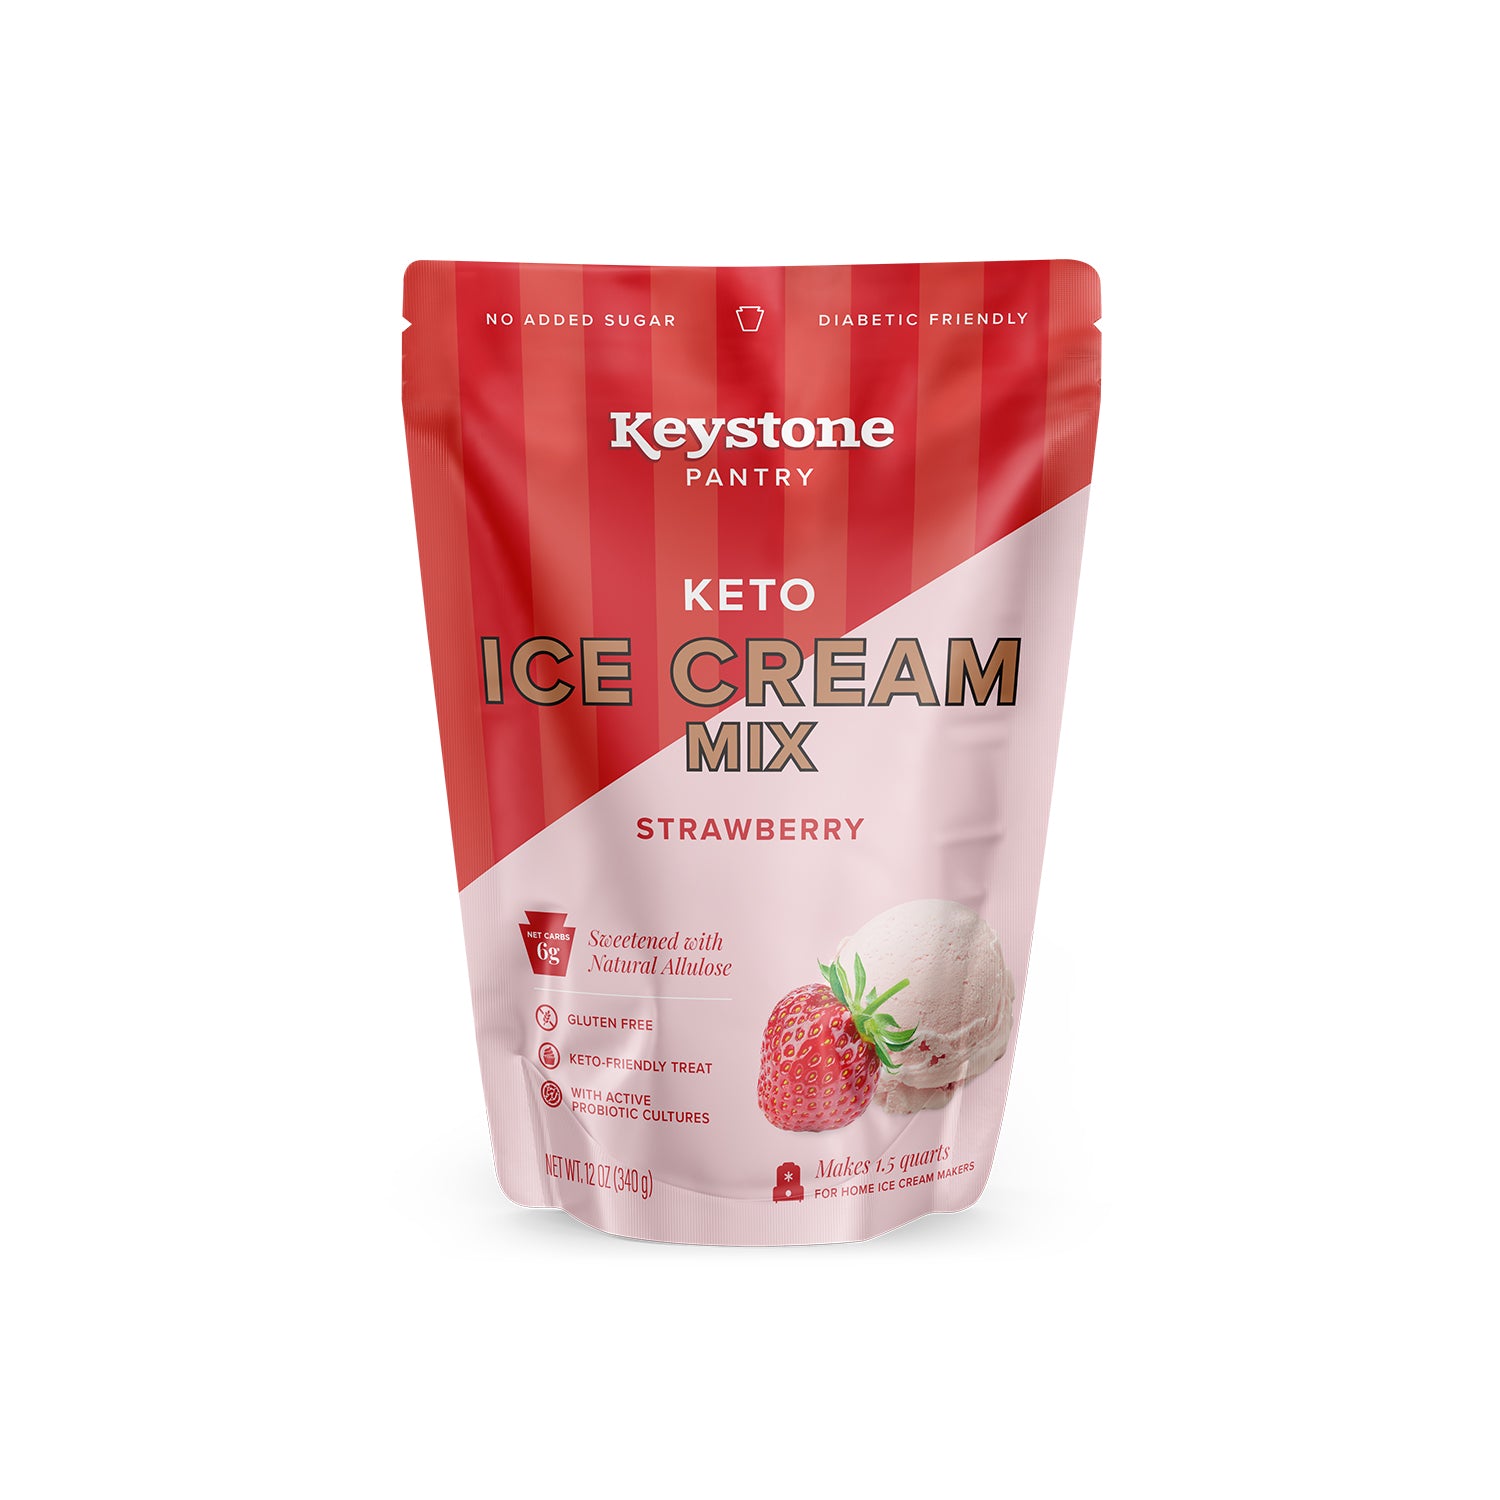 Keystone Pantry Strawberry Ice Cream Mix is the Perfect Diabetic and Keto Friendly Treat 